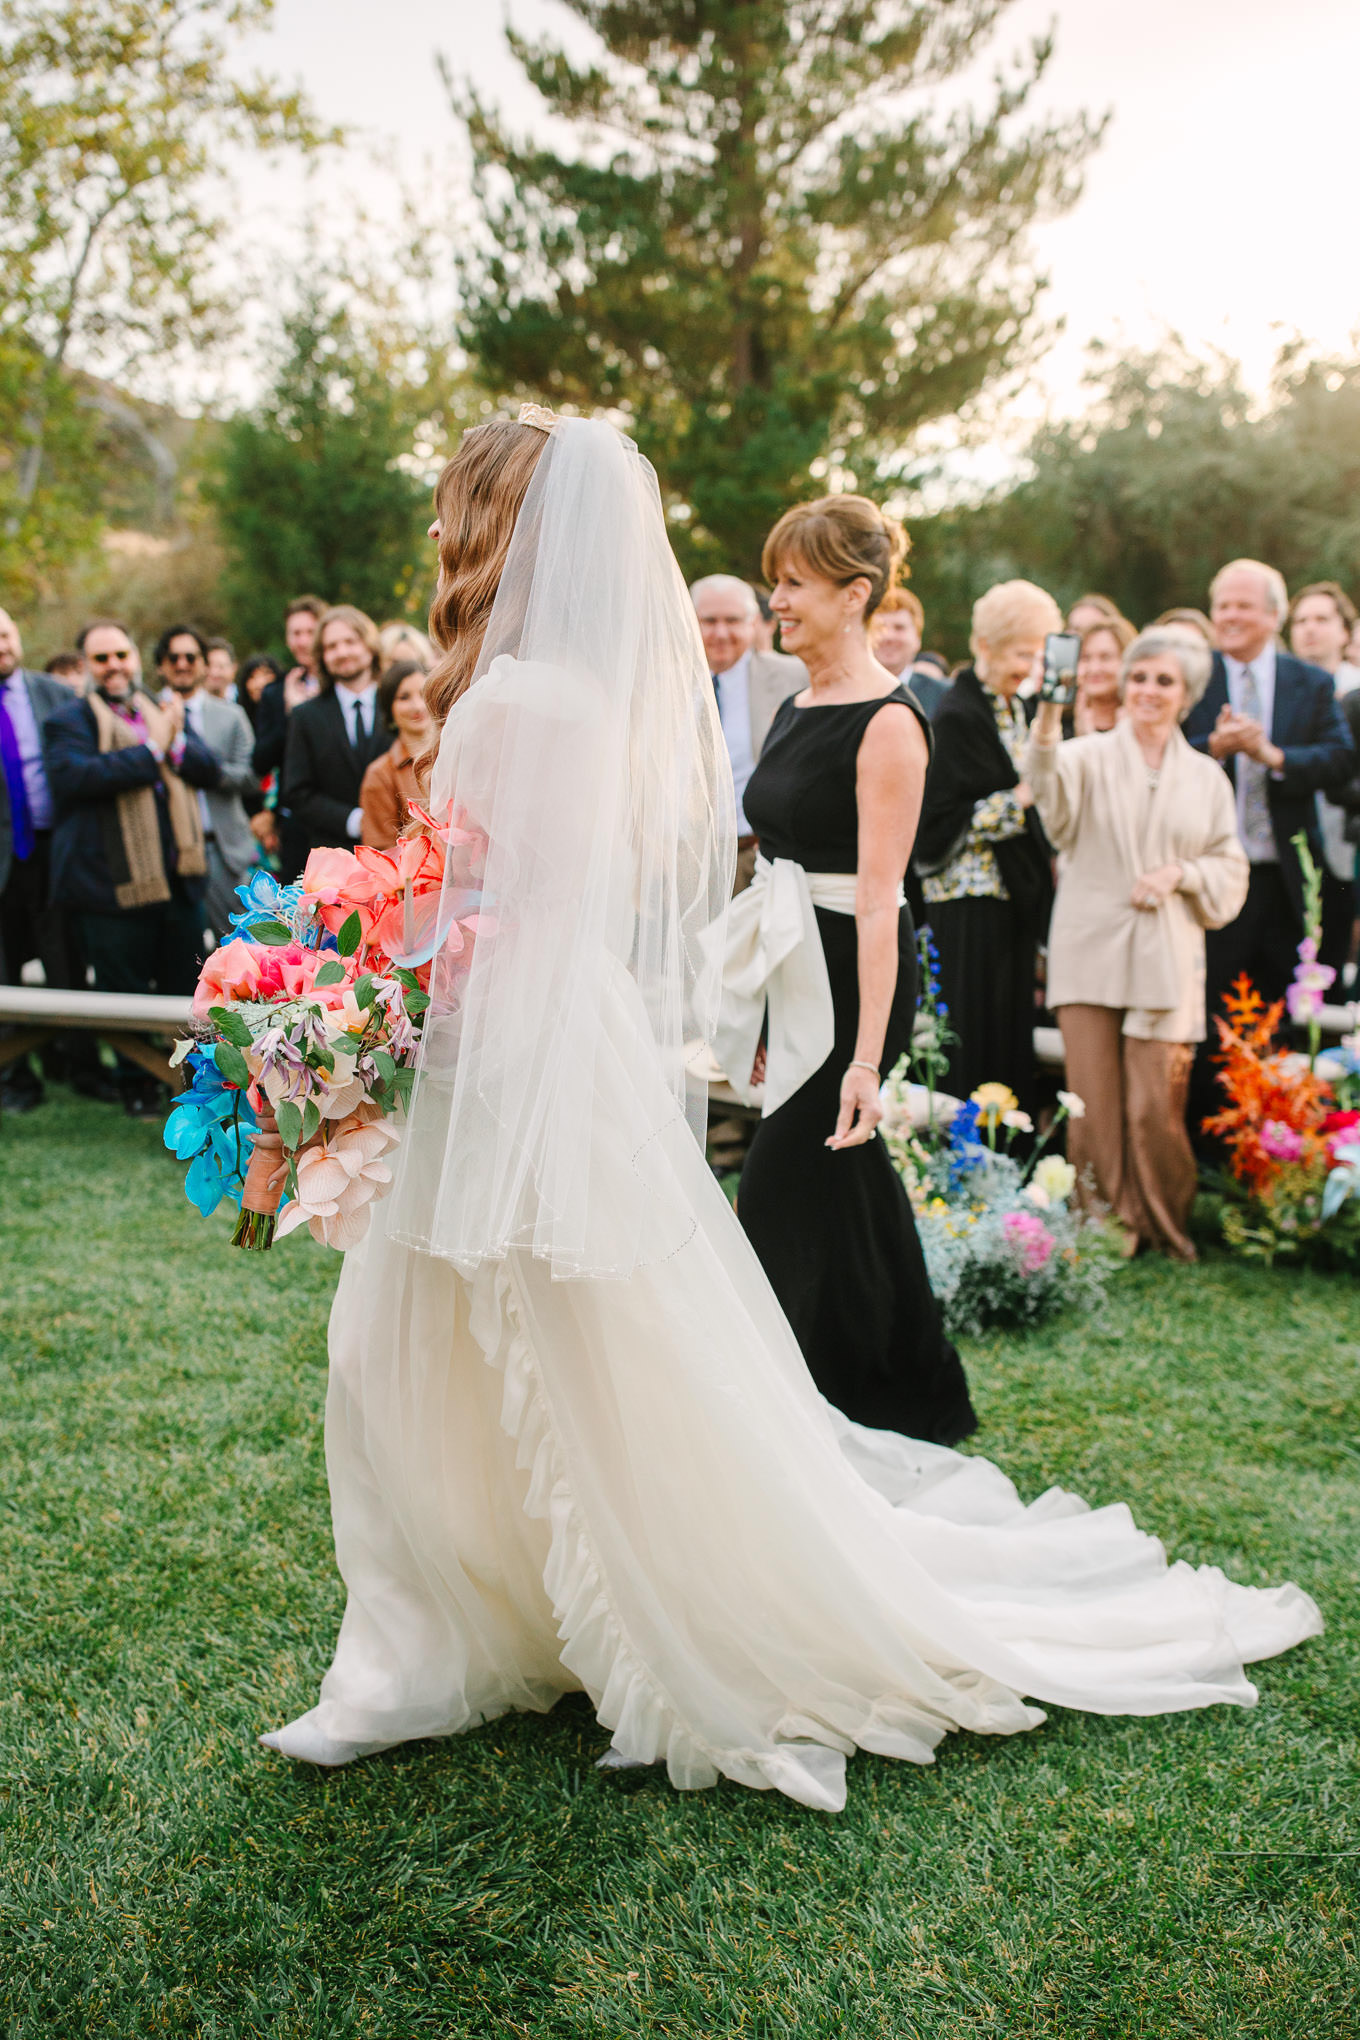 Bride walking down the aisle at wedding ceremony | Colorful and quirky wedding at Higuera Ranch in San Luis Obispo | #sanluisobispowedding #californiawedding #higueraranch #madonnainn   
Source: Mary Costa Photography | Los Angeles